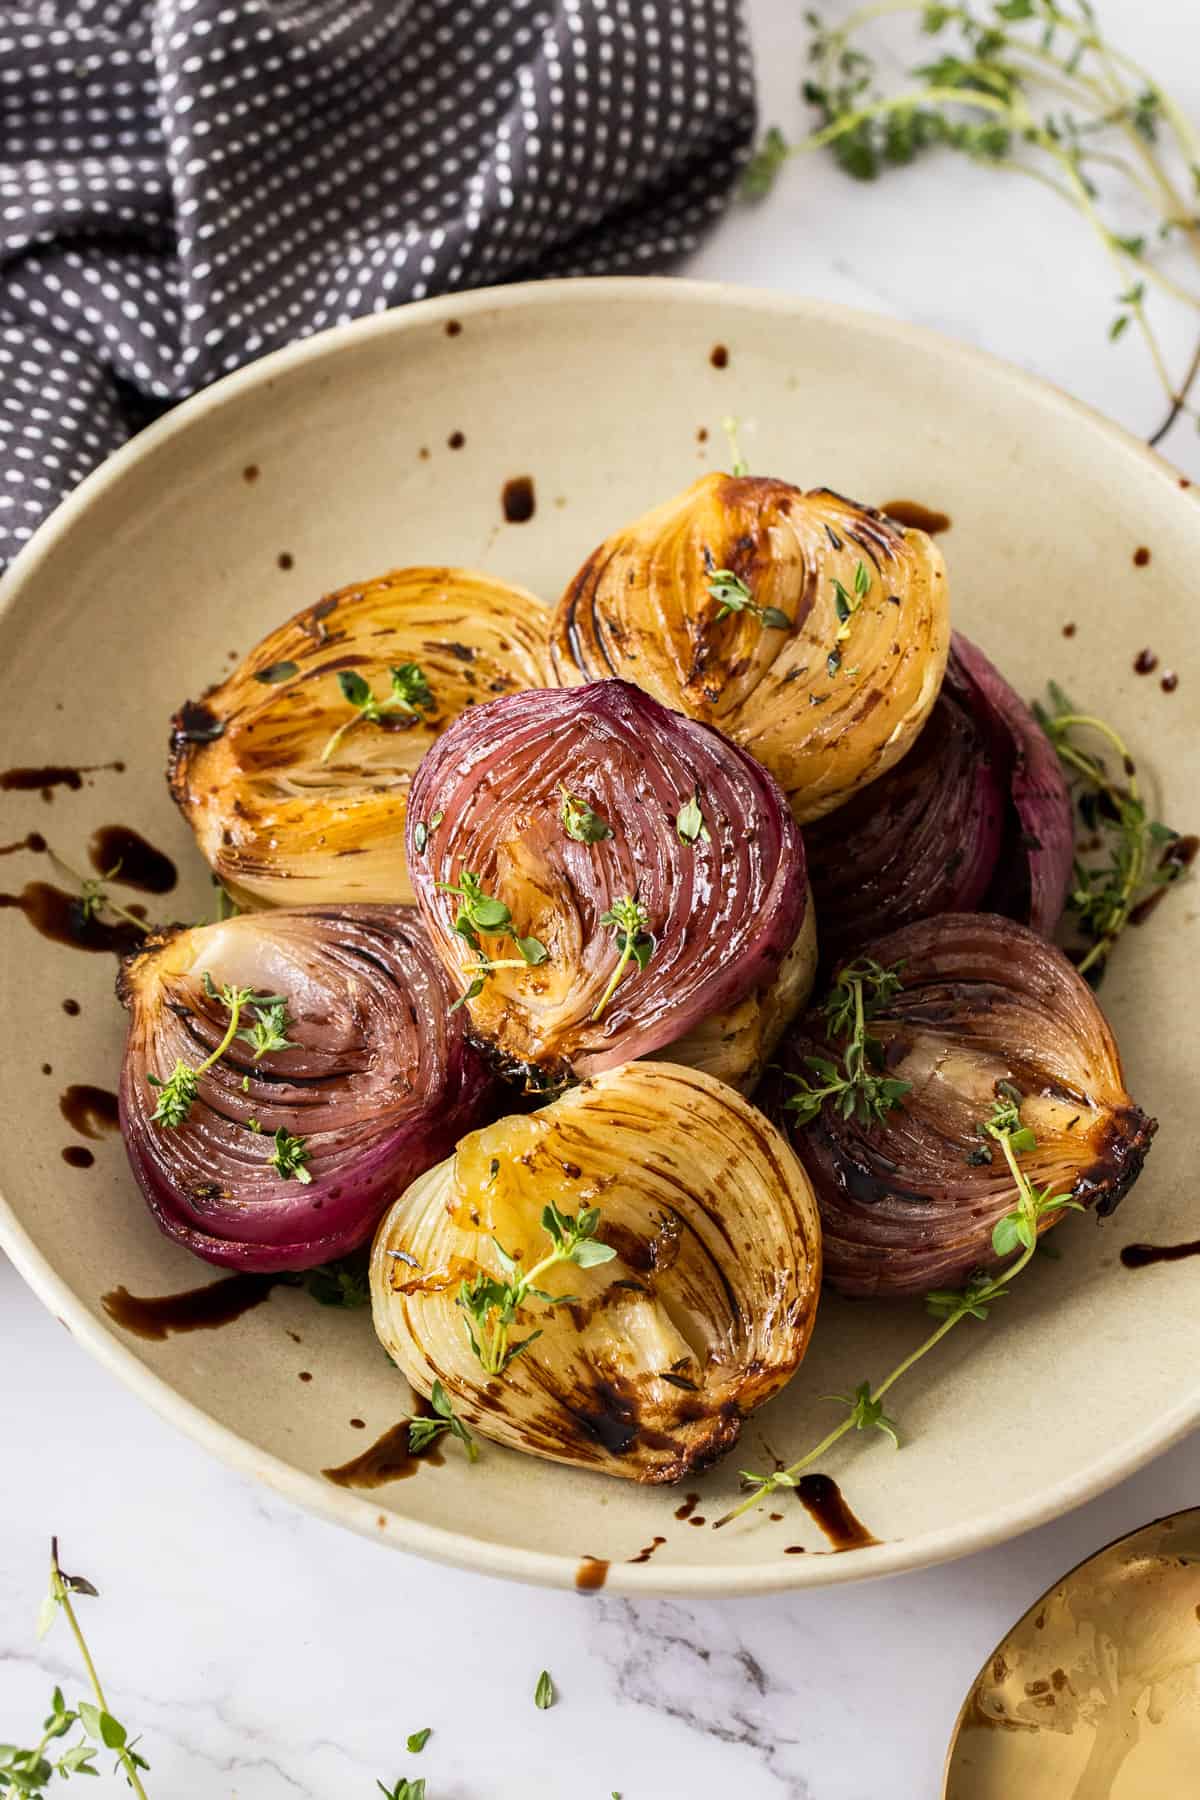 Round dish of roasted onions garnished with some fresh thyme leaves and drizzled with balsamic glaze.